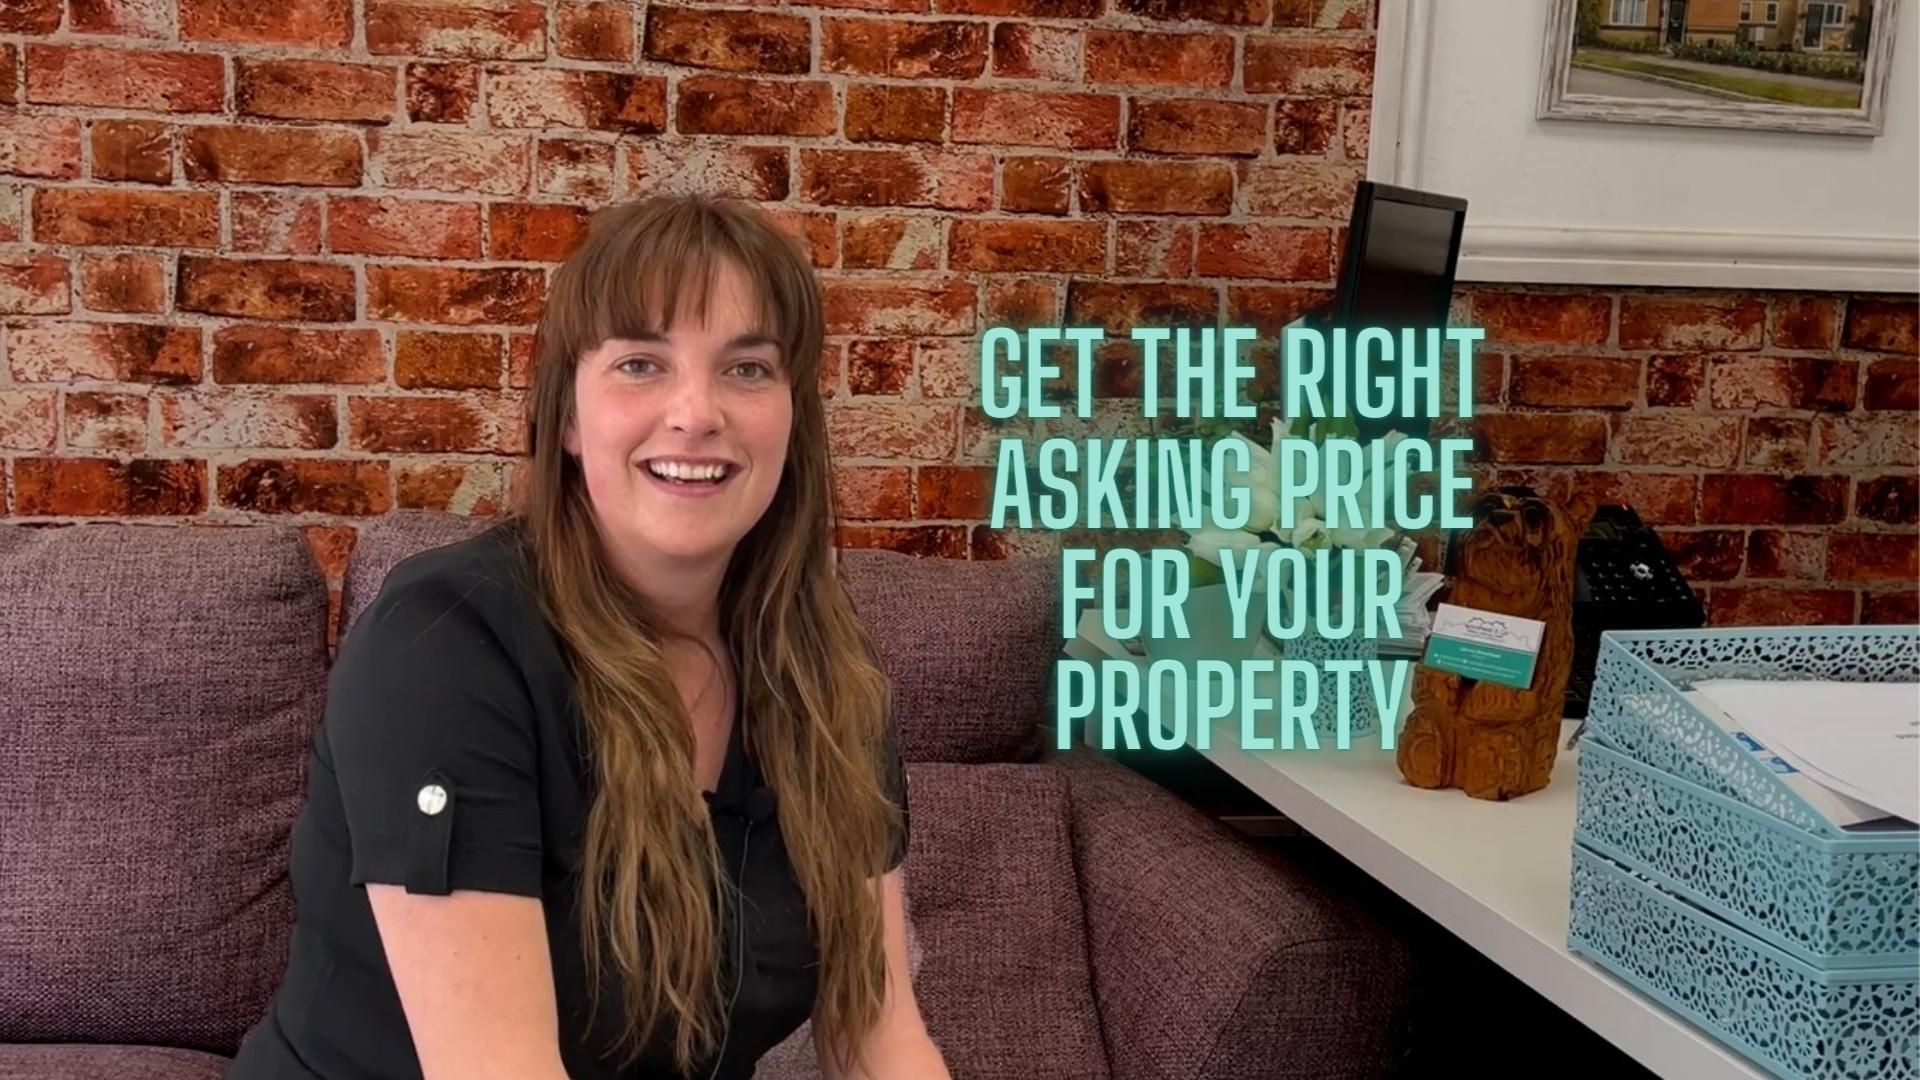 VIDEO: Get The Right Asking Price For Your Property